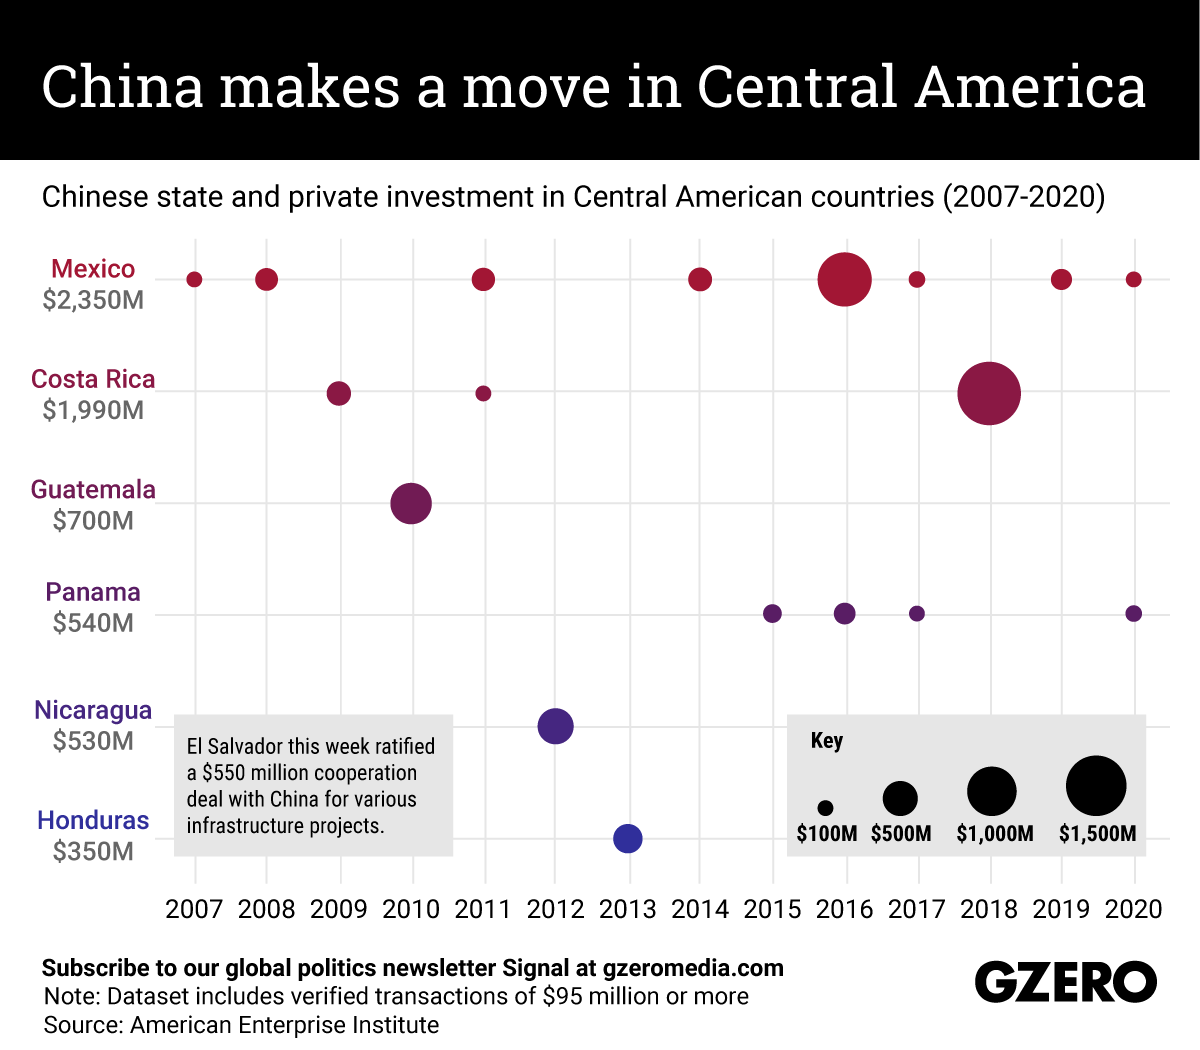 The Graphic Truth: China makes a move in Central America